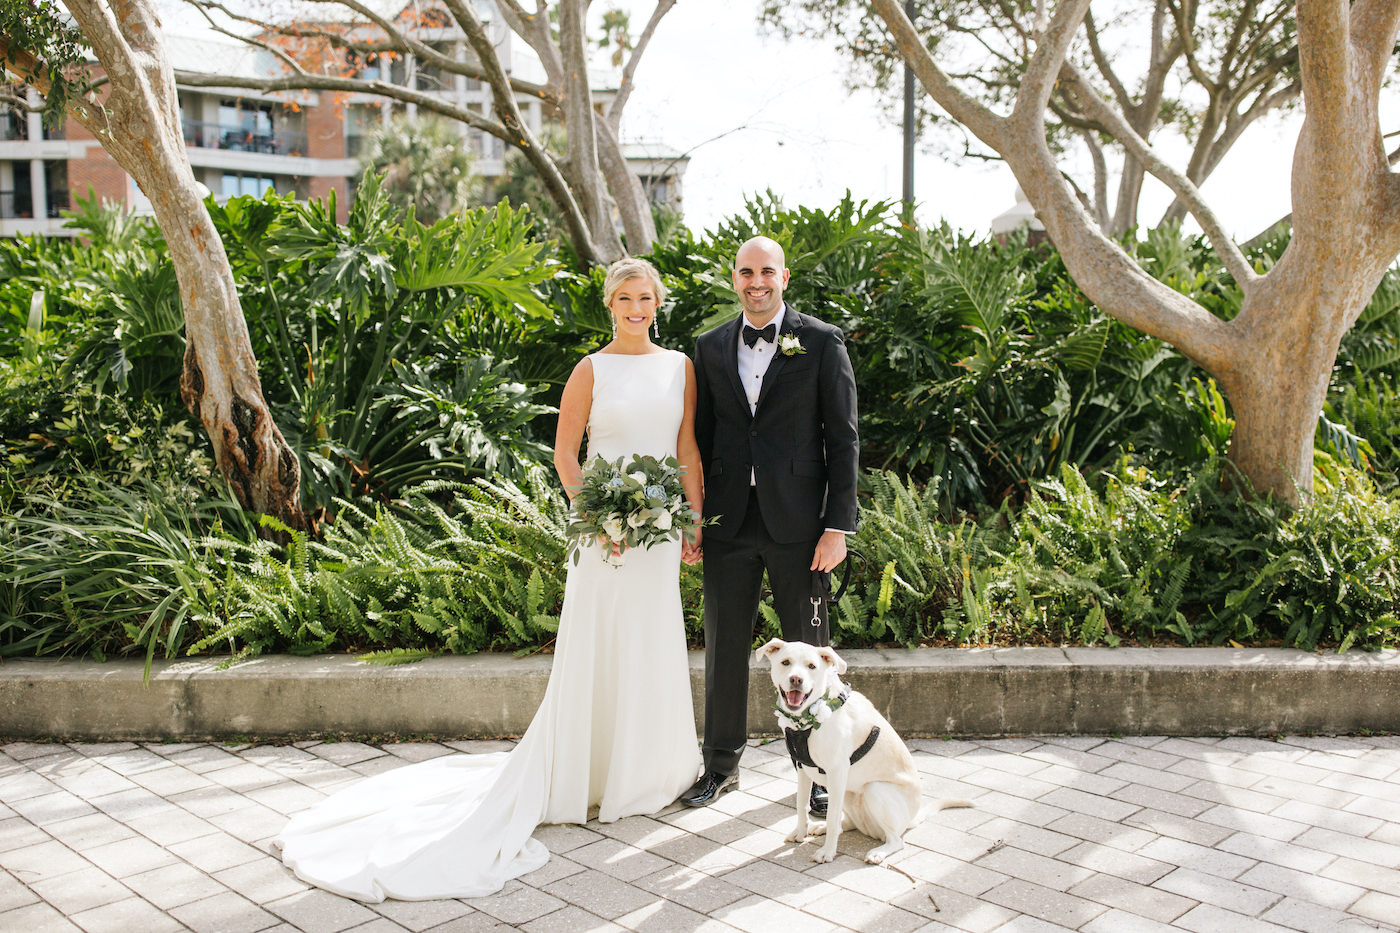 Bride and Groom and Dog of Honor Outdoor Portrait | Simple Sheath Ivory Crepe Bateau Neck Bridal Gown by Theia | Groom in Classic Black Tux Suit with Bow Tie | FairyTail Pet Care